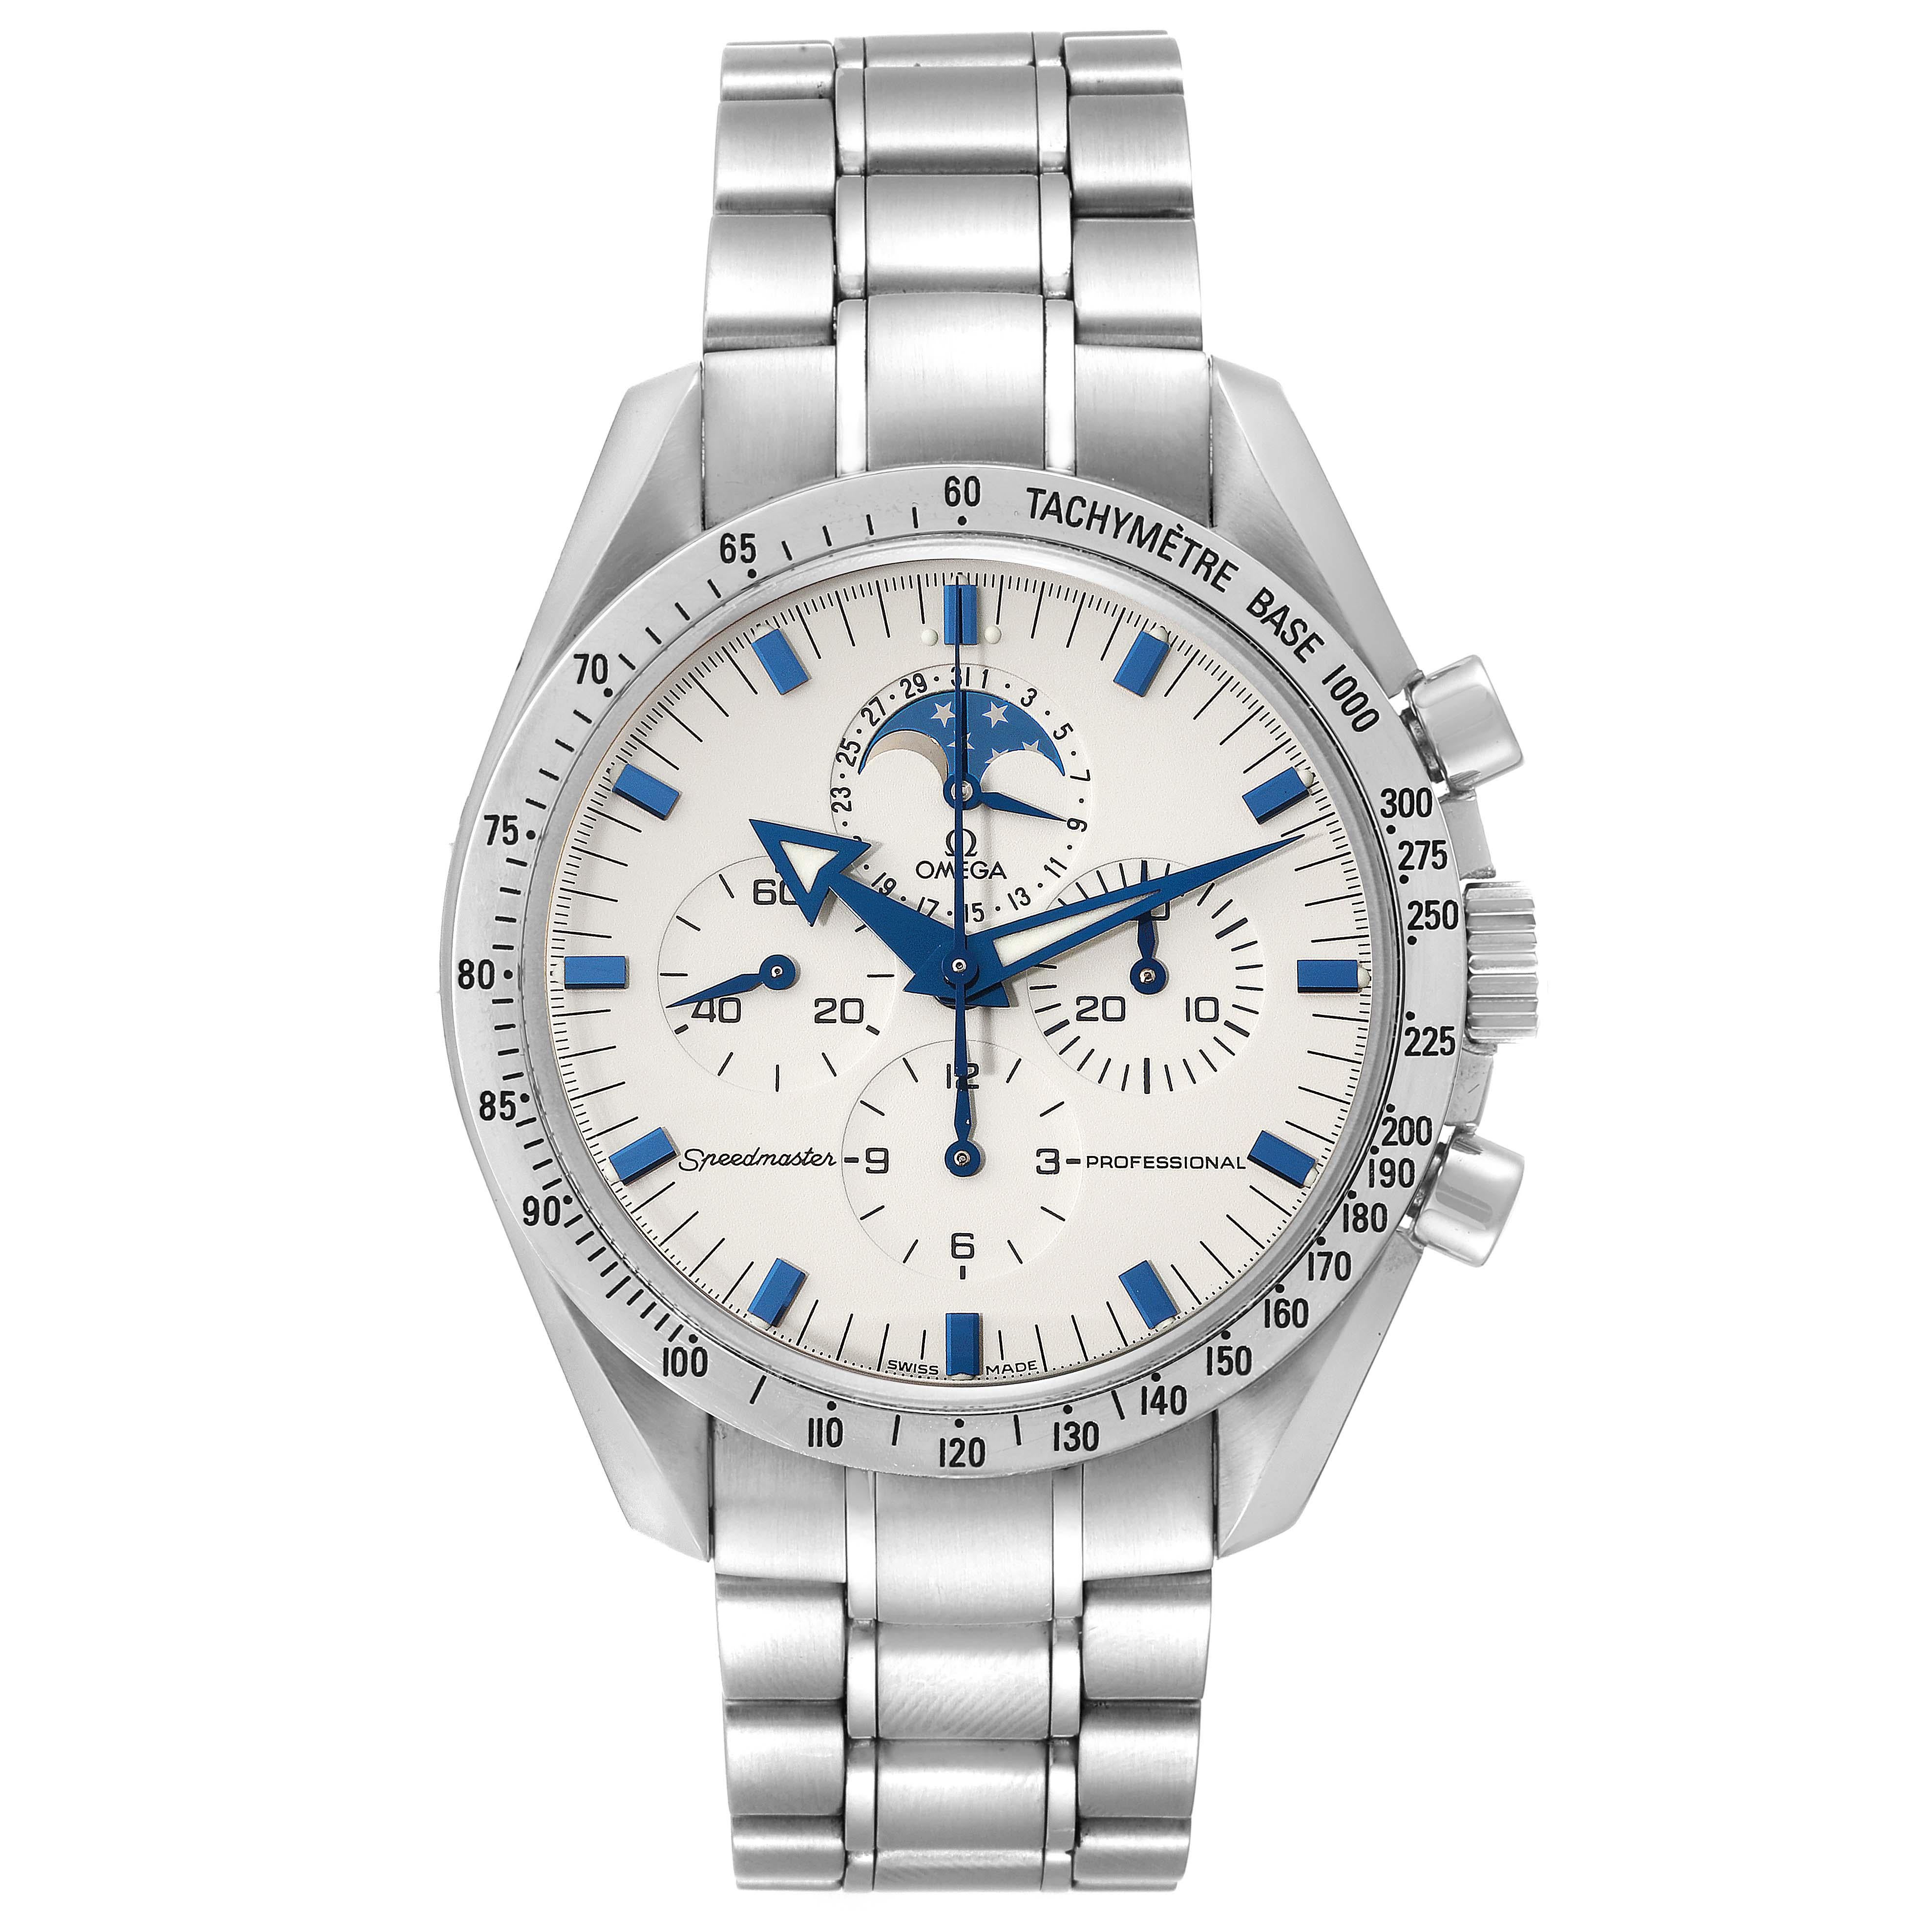 Omega Speedmaster Moon Phase Chronograph Steel Mens Watch 3575.20.00 Card. Manual-winding chronograph movement. Stainless steel round case 42 mm in diameter. Stainless steel bezel with tachymetre function. Scratch-resistant sapphire crystal with